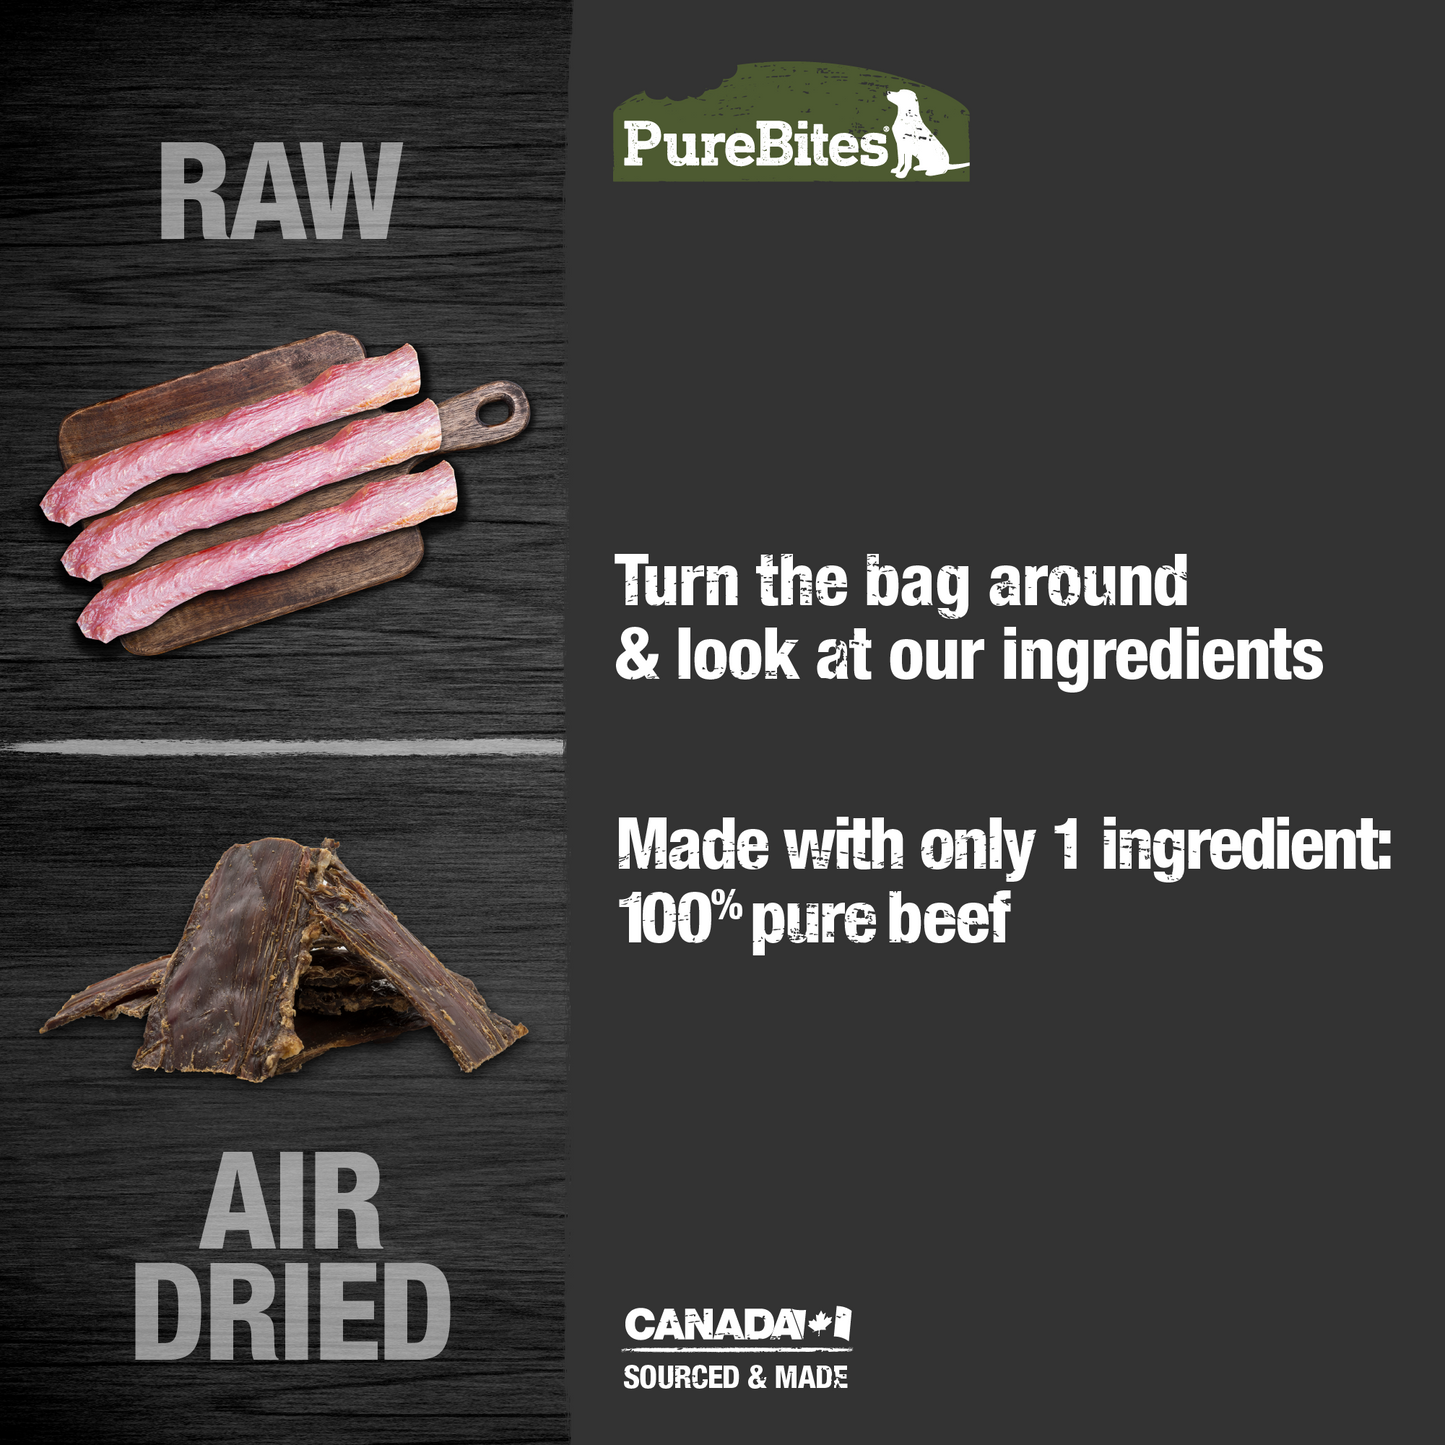 Made with only 1 Ingredient you can read, pronounce, and trust: Canadian sourced beef.